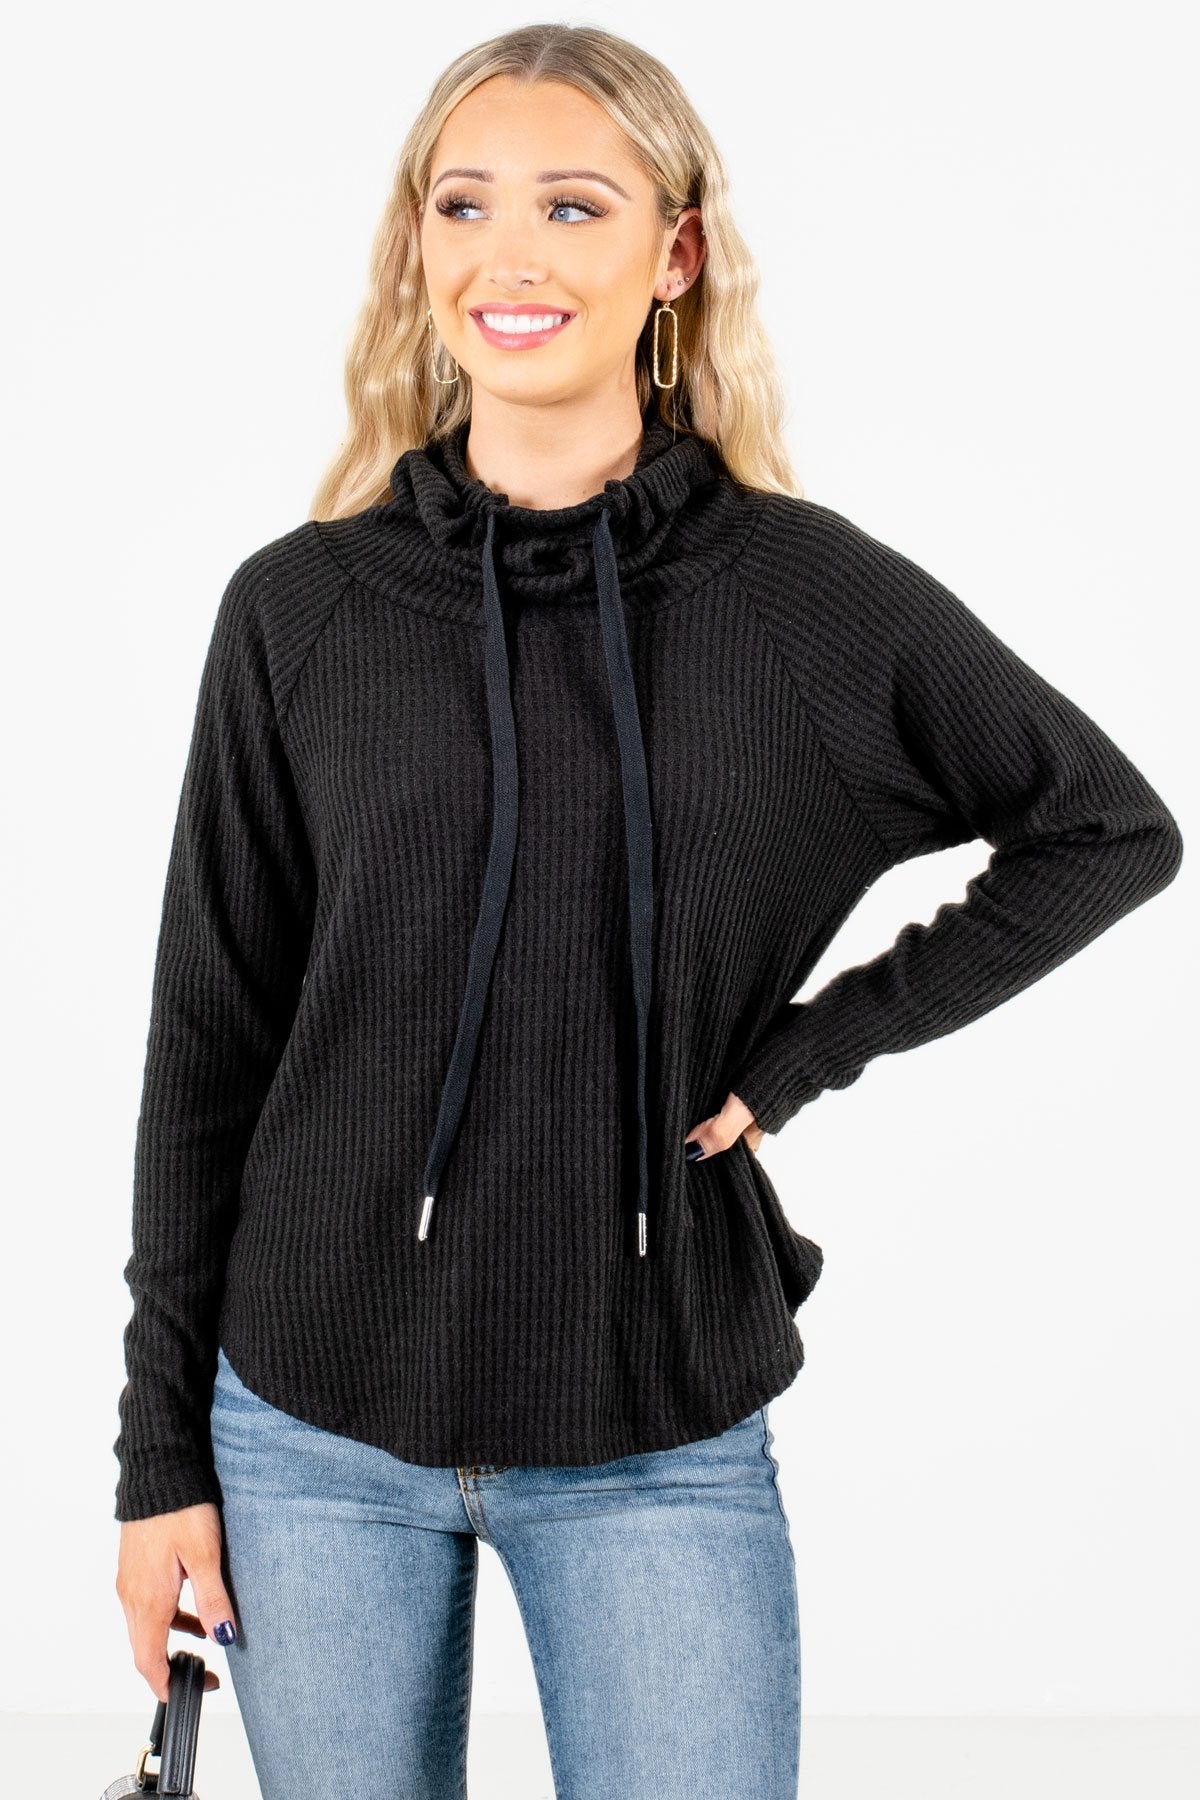 Women’s Black Warm and Cozy Boutique Sweater